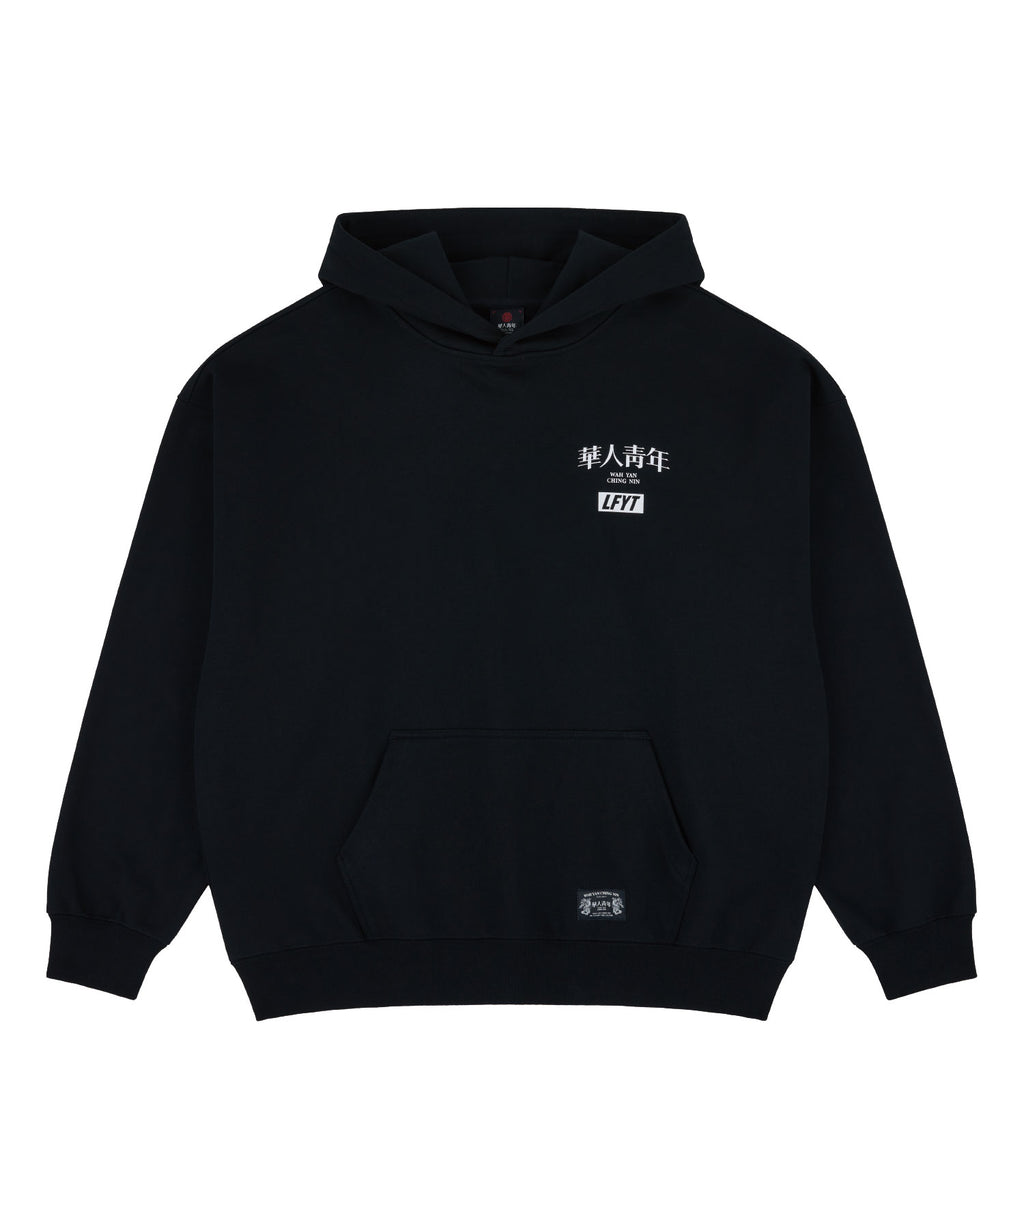 SWEATSHIRT online shopping | LFYT OFFICIAL SITE